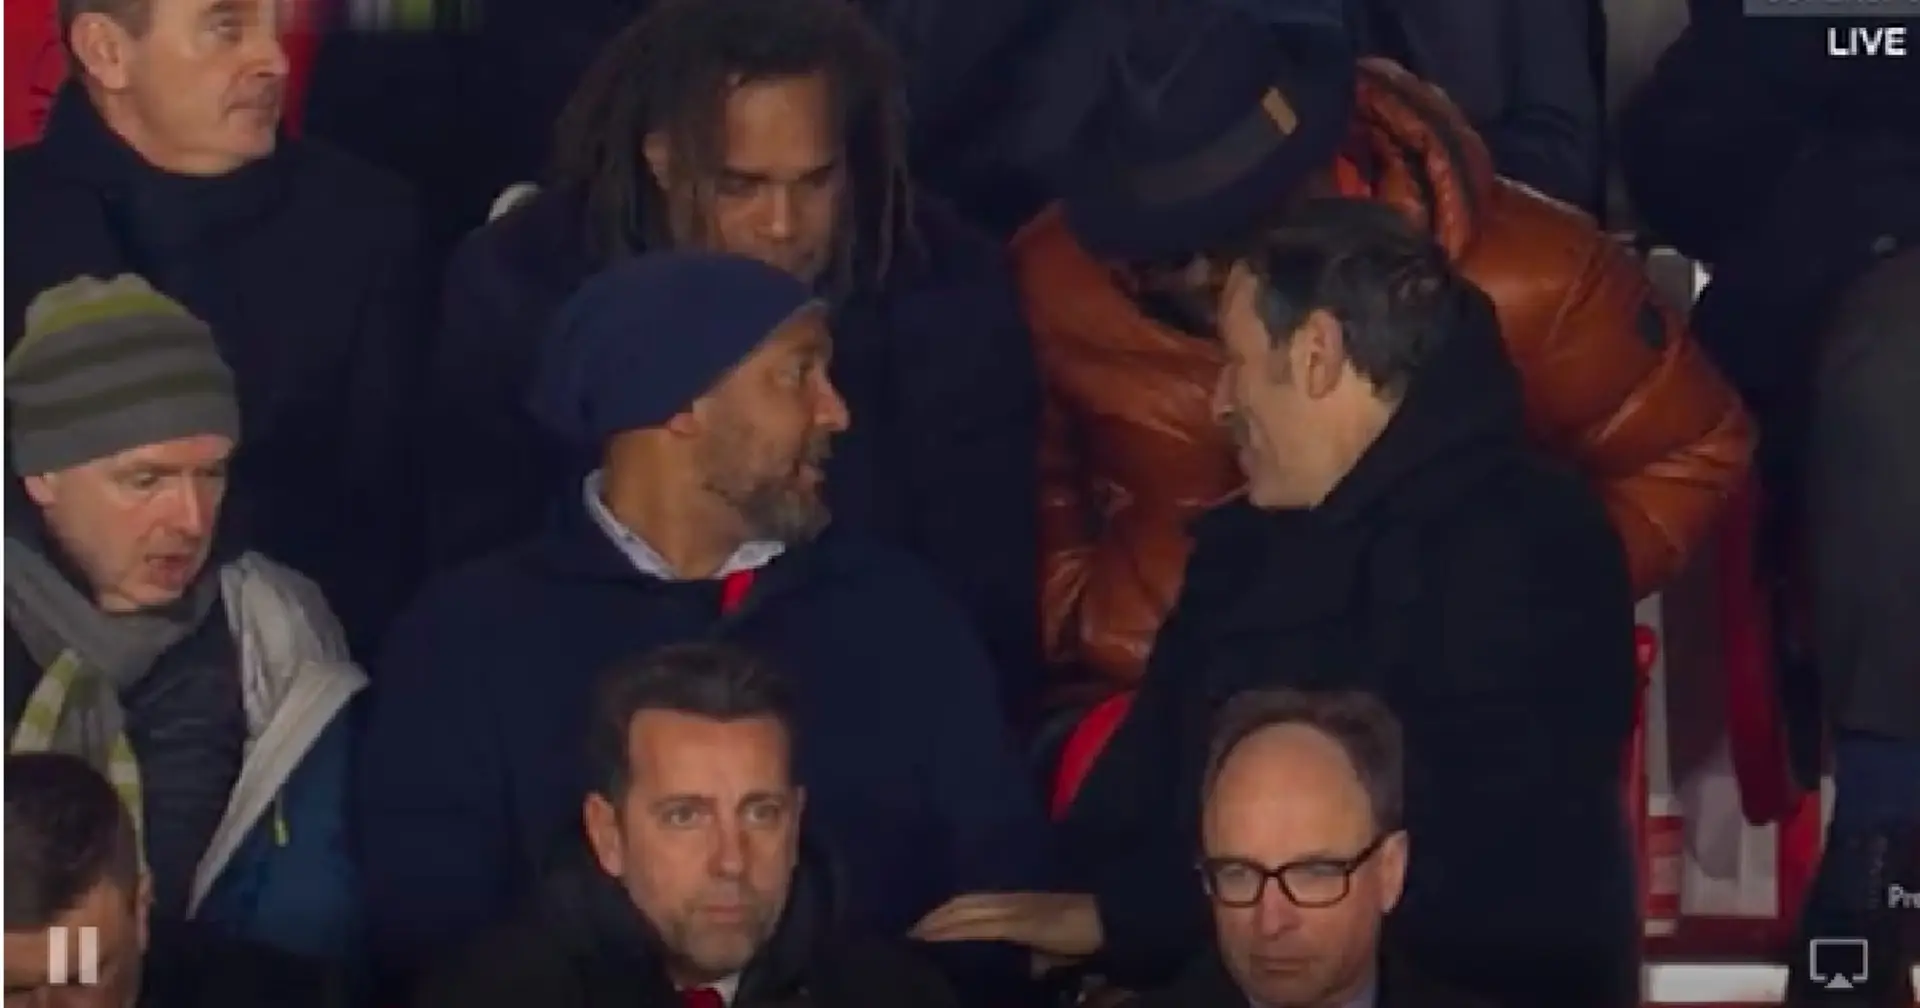 French football legends including Pires spotted at Forest game - why were they there? 